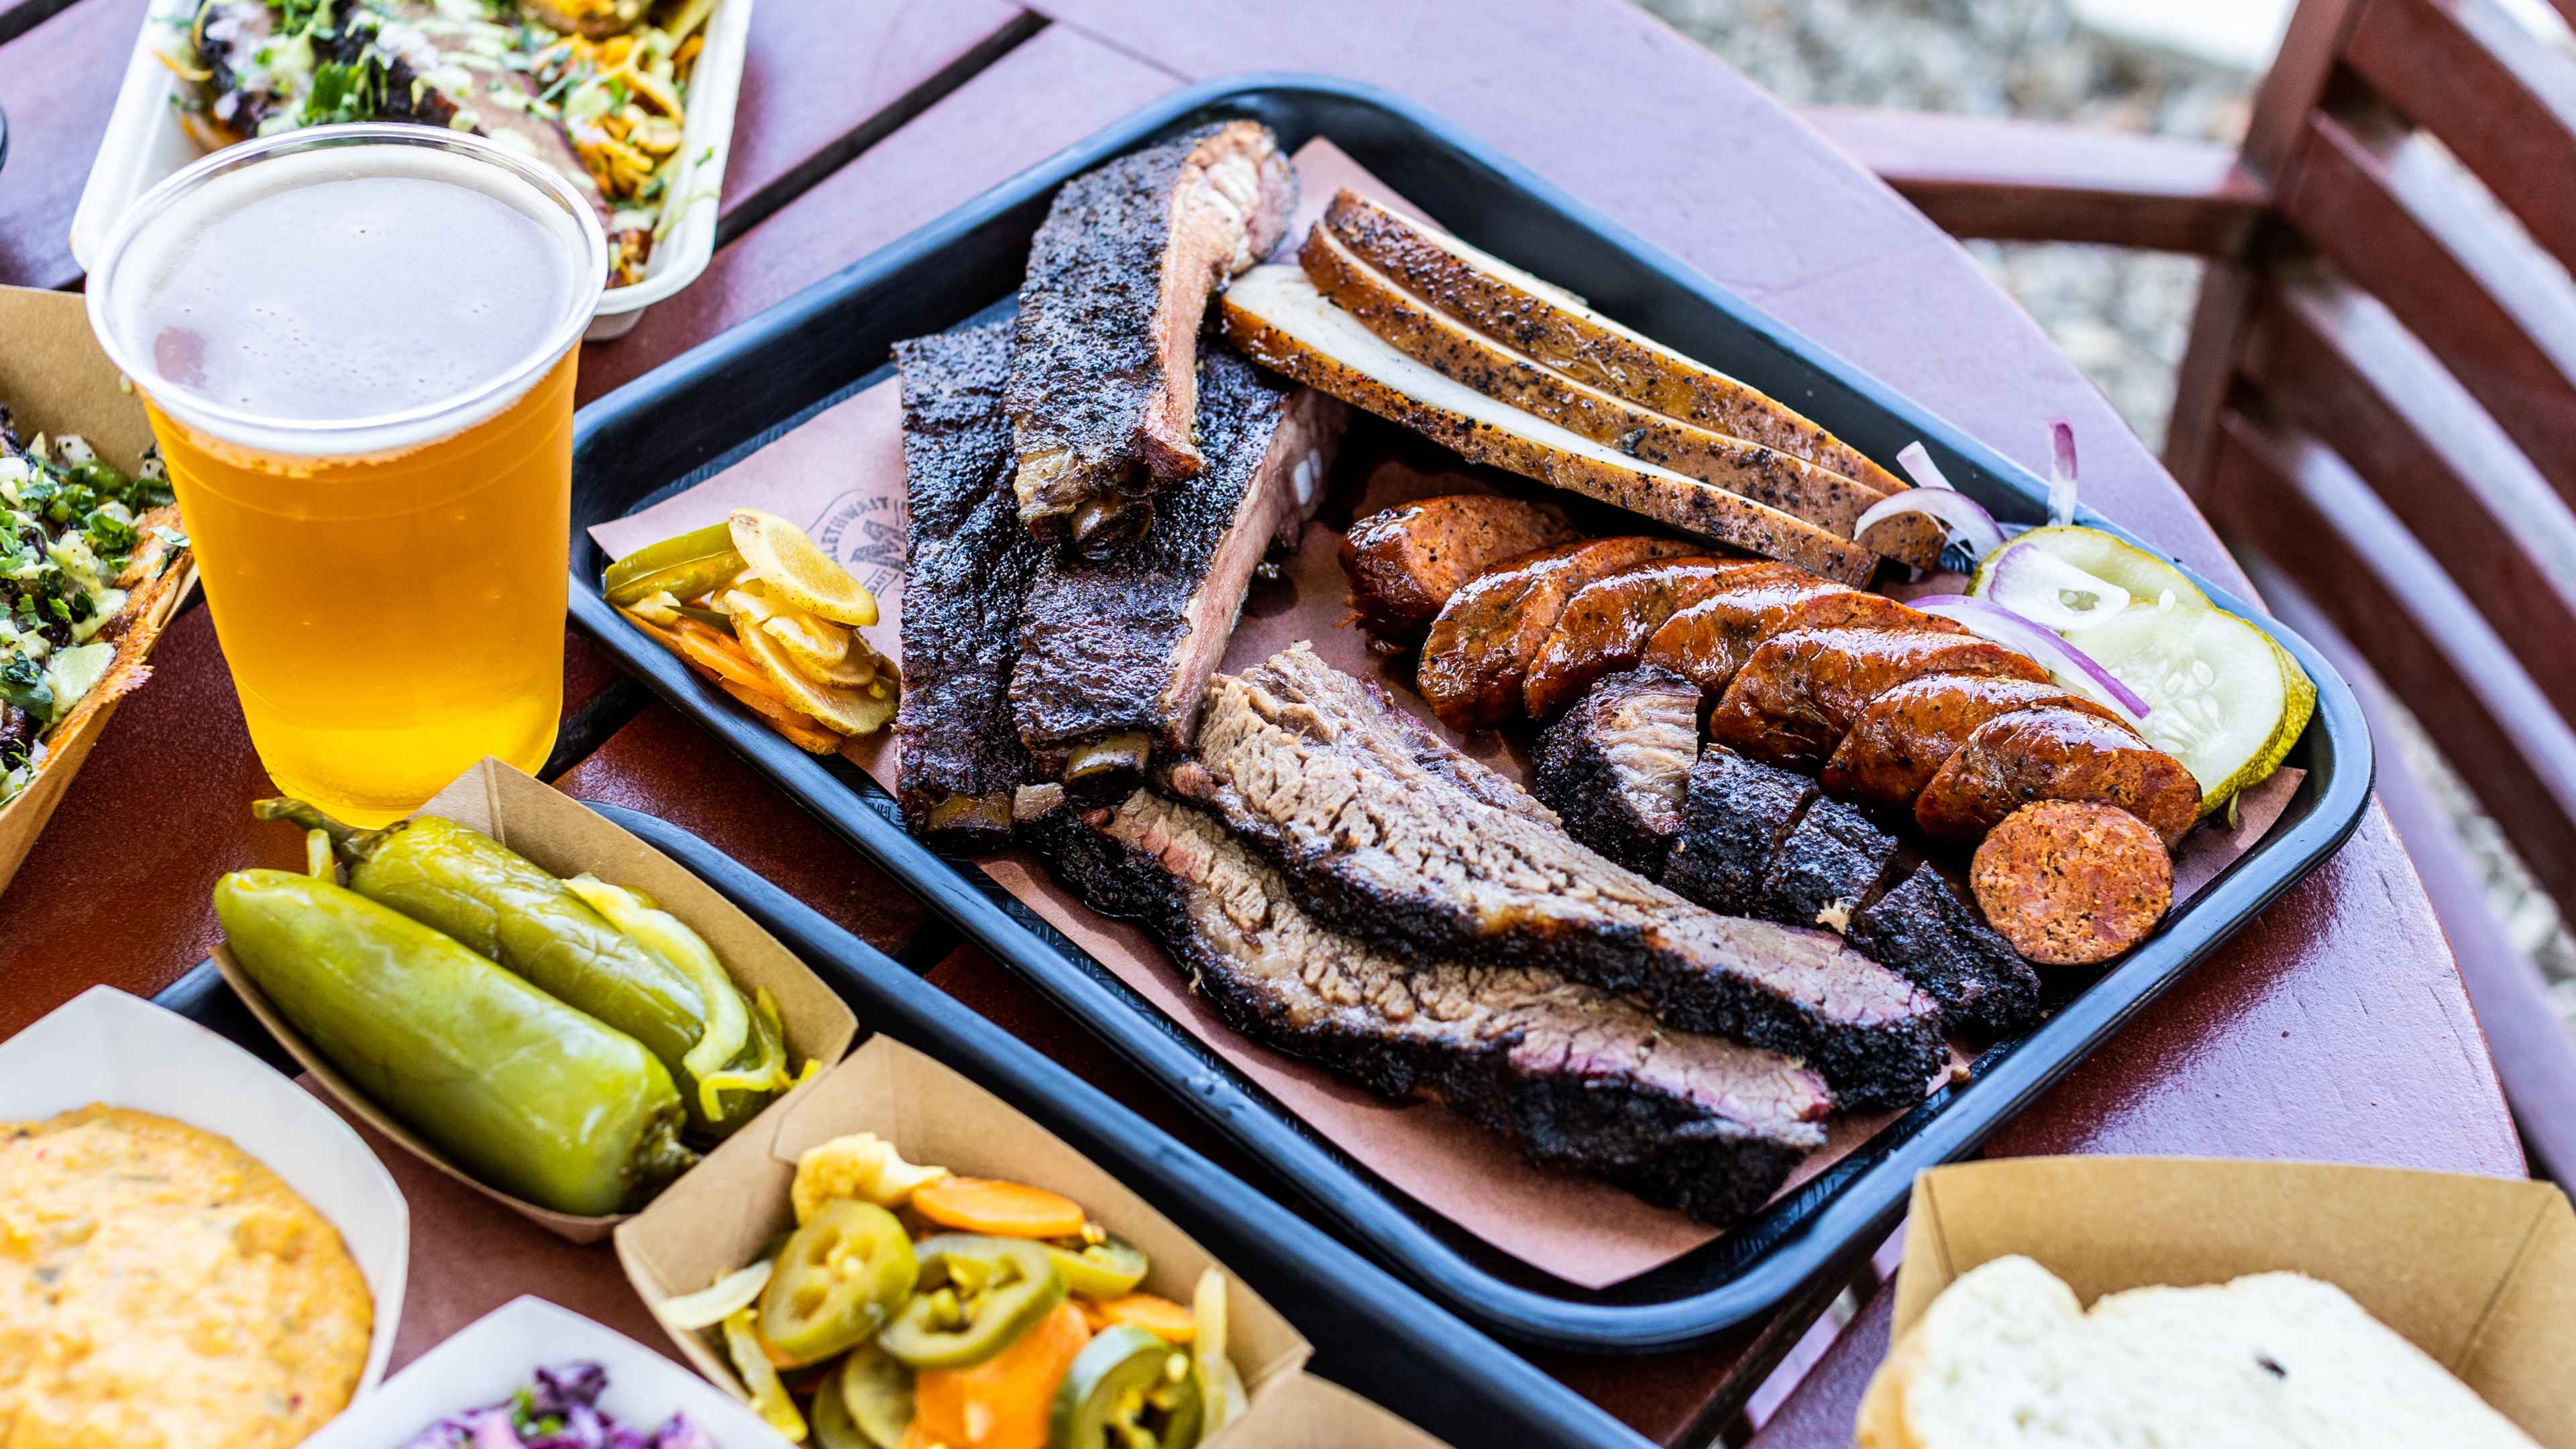 The BBQ Platter at Micklethwait, served on a black lunch tray. There is a tray of sides in brown takeway bowls, and a plastic cup of beer.